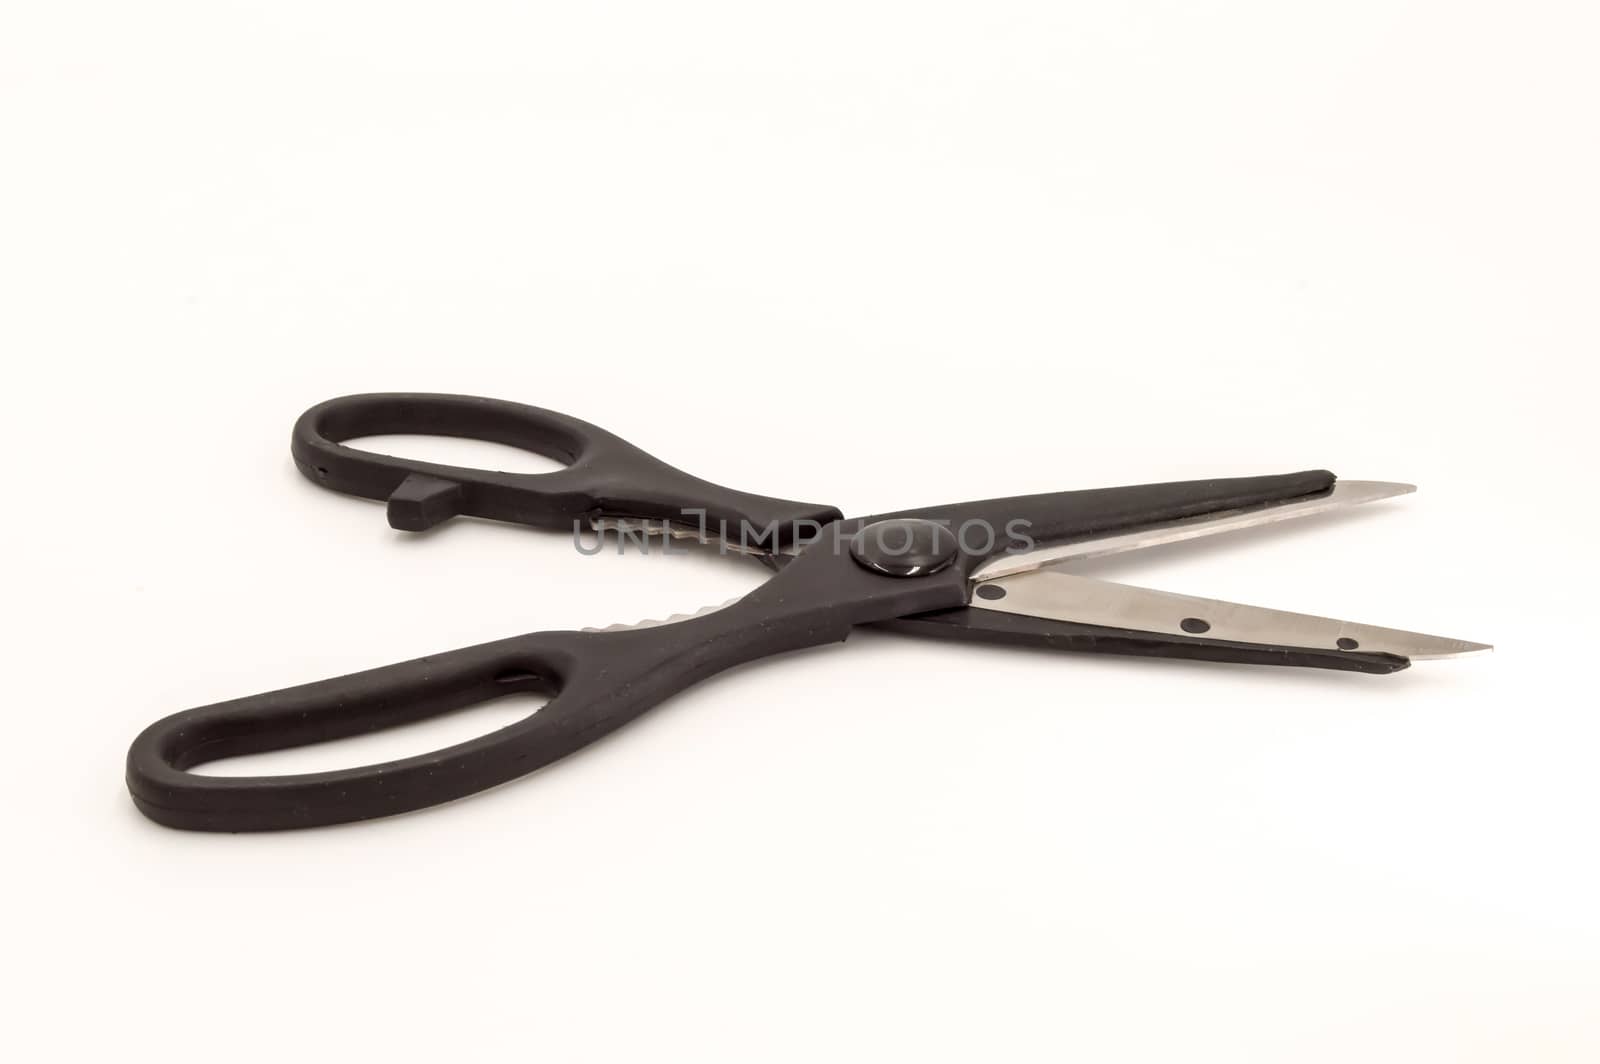 Kitchen scissor with a black handle,  by Philou1000